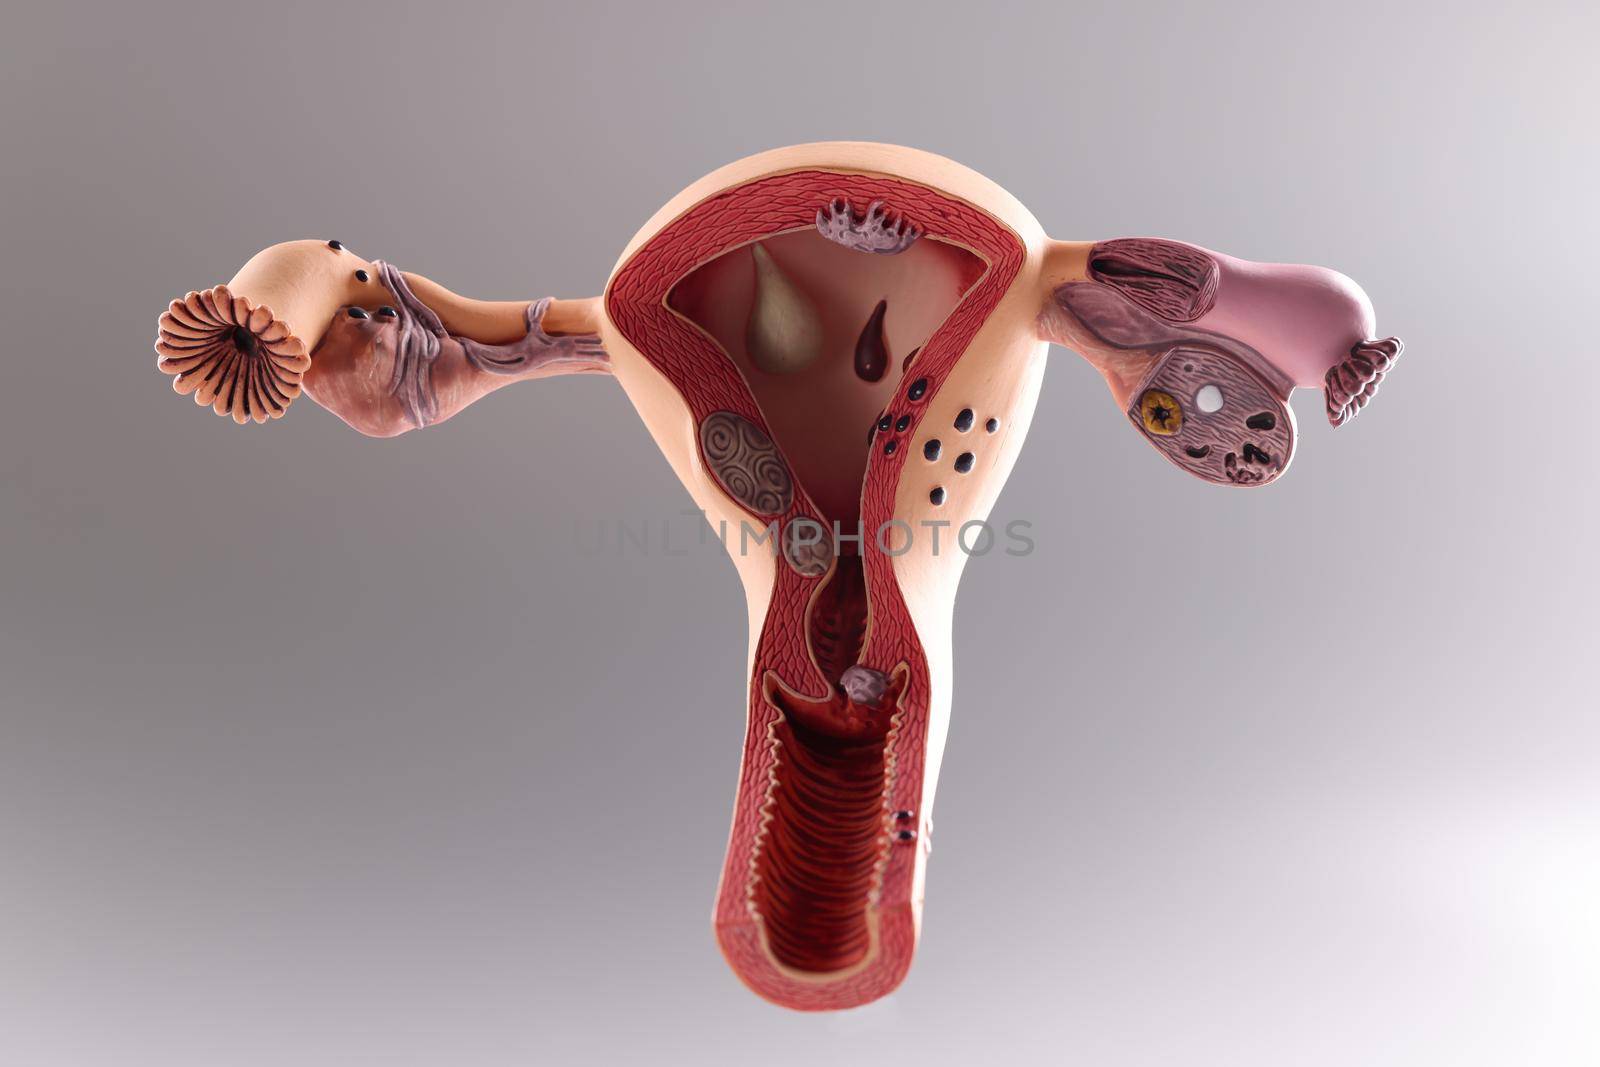 Model of the female reproductive system on gray background by kuprevich